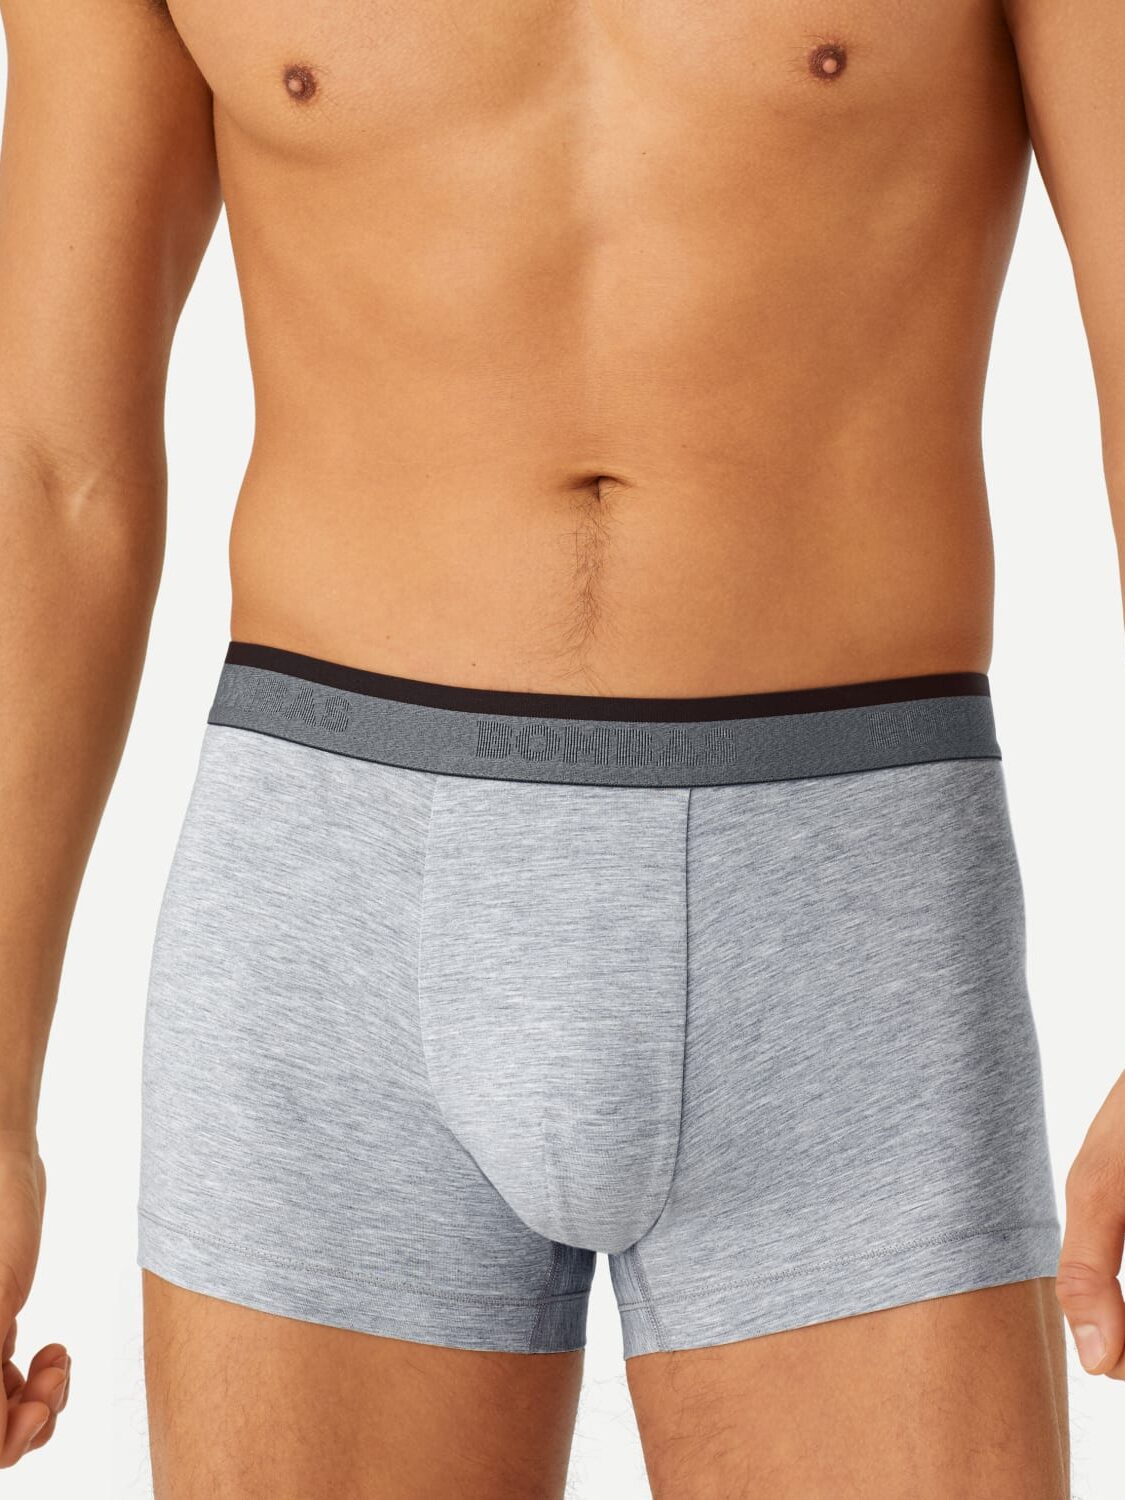 A person wearing gray boxer briefs with a black waistband. Only the lower torso and thighs are visible.